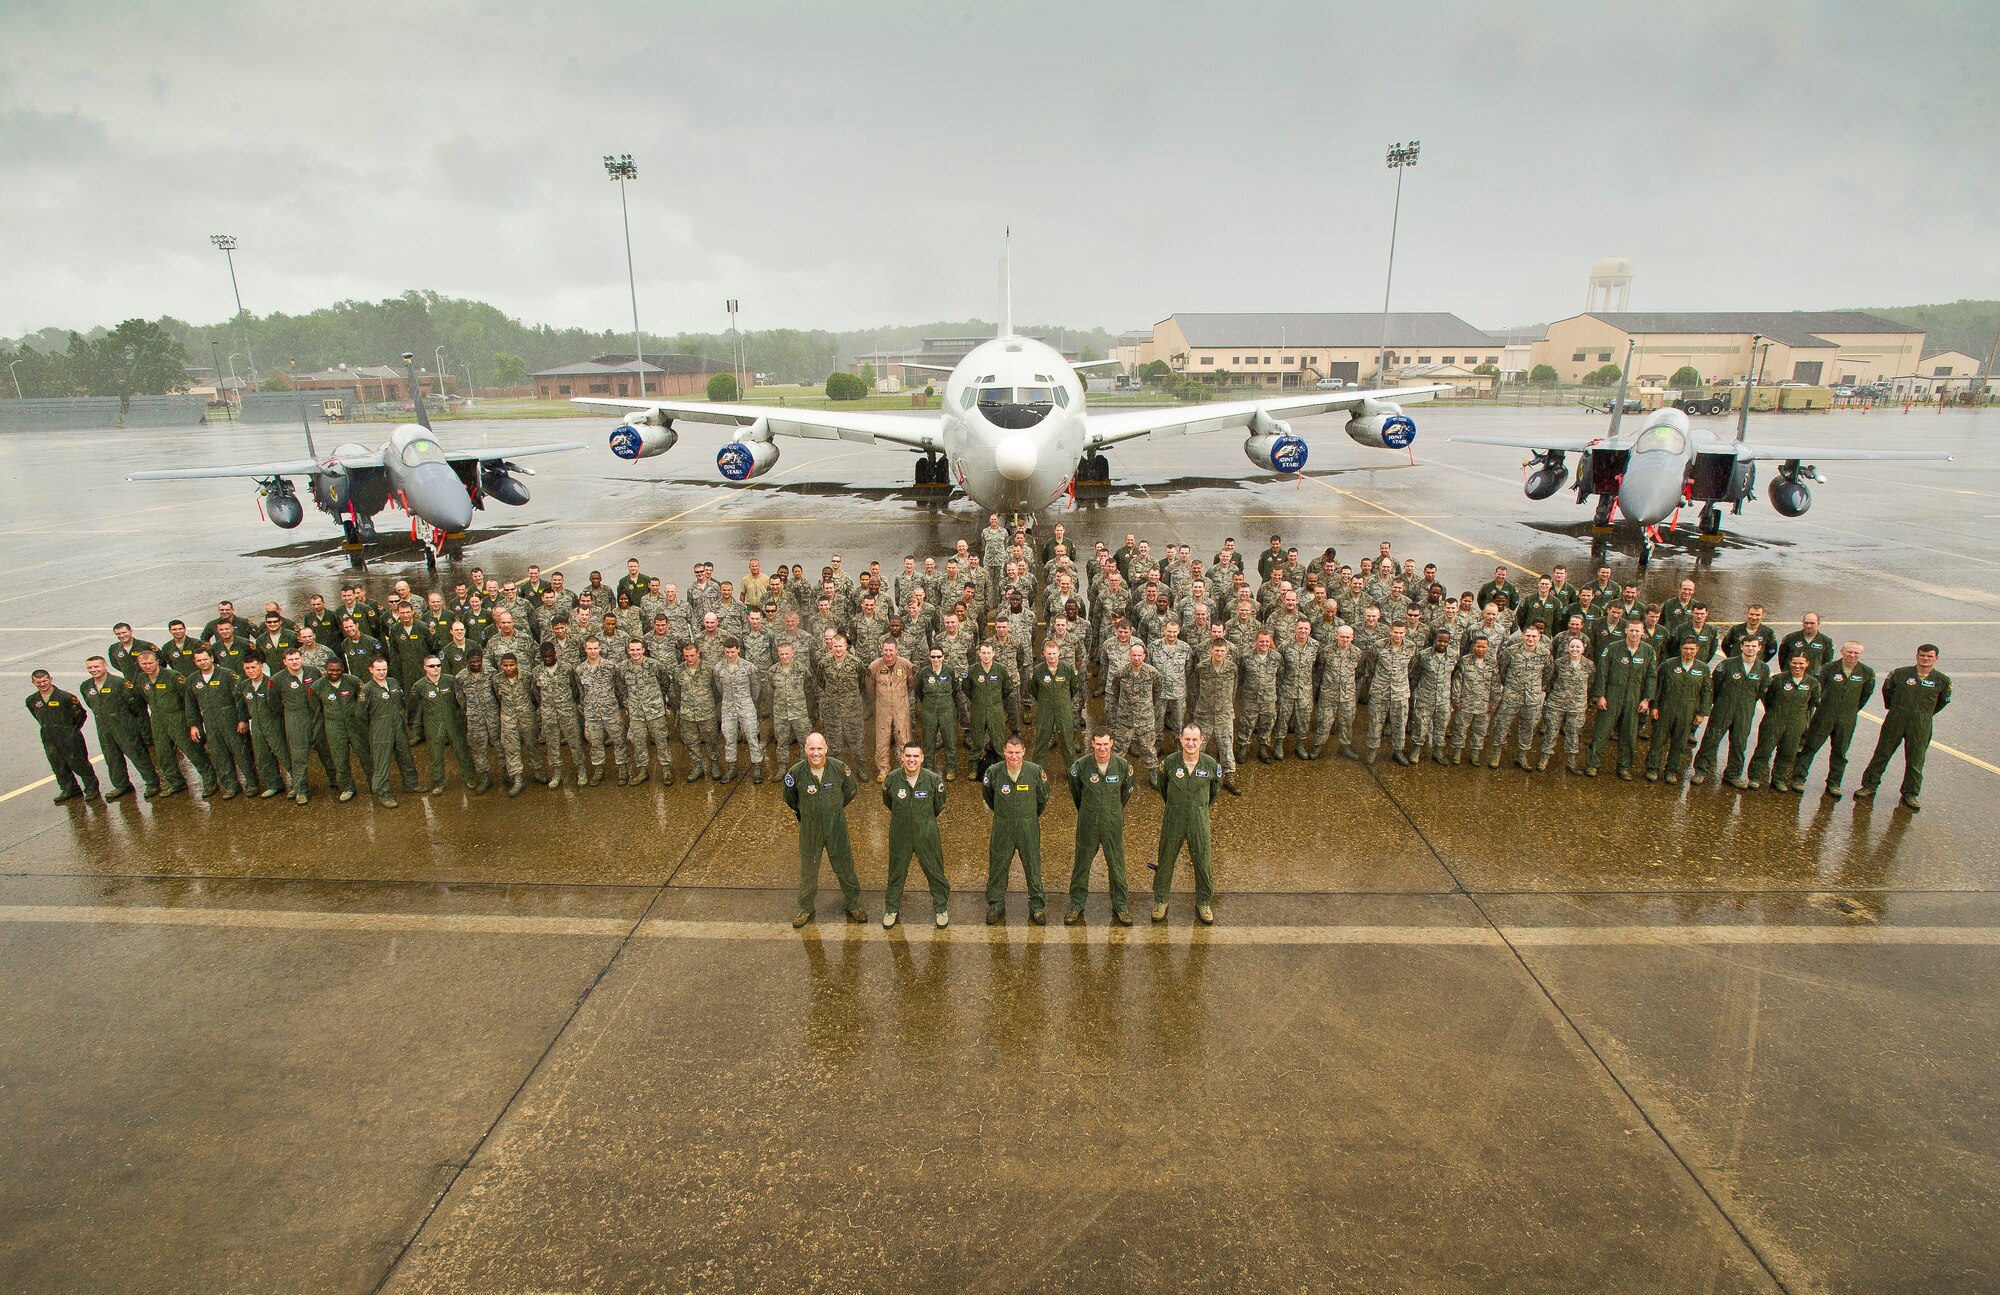 U.S. Air Force Airmen from the 116th and 461st Air Control Wings, Robins Air Force Base, Ga., and the 4th Fighter Wing, Seymour Johnson, N.C., pose for a photo in front of an E-8 Joint STARS and two F-15E Strike Eagles at Robins Air Force Base, Ga., June 10, 2012.  The 4th Fighter Wing was at Robins for the Iron Dagger exercise being hosted by Team JSTARS.   (National Guard photo by Master Sgt. Roger Parsons/Released)